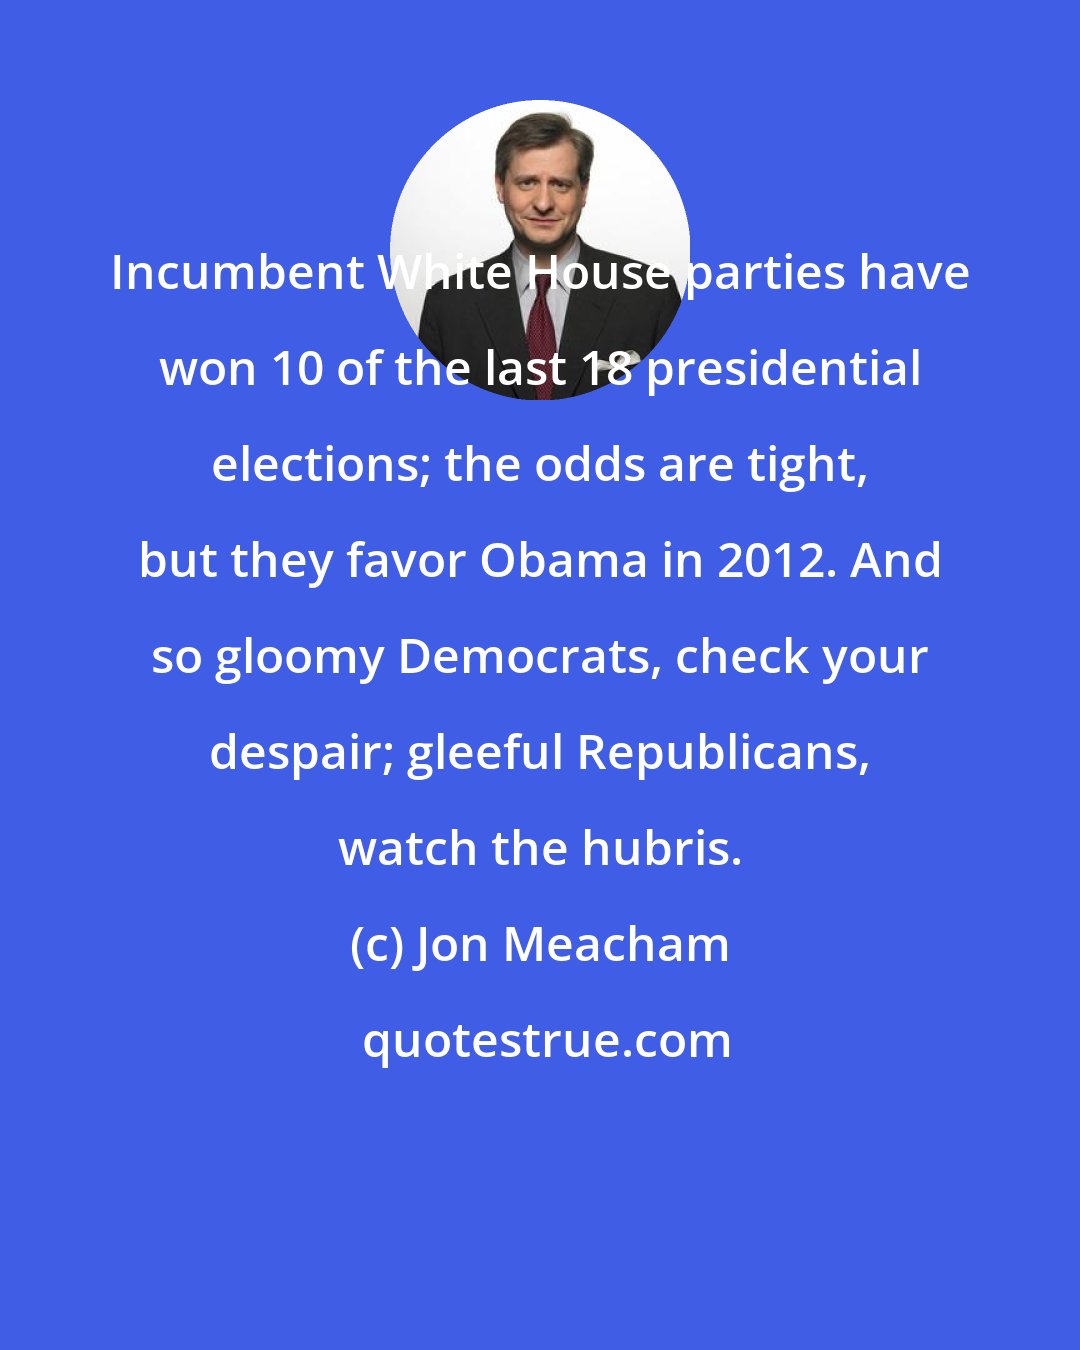 Jon Meacham: Incumbent White House parties have won 10 of the last 18 presidential elections; the odds are tight, but they favor Obama in 2012. And so gloomy Democrats, check your despair; gleeful Republicans, watch the hubris.